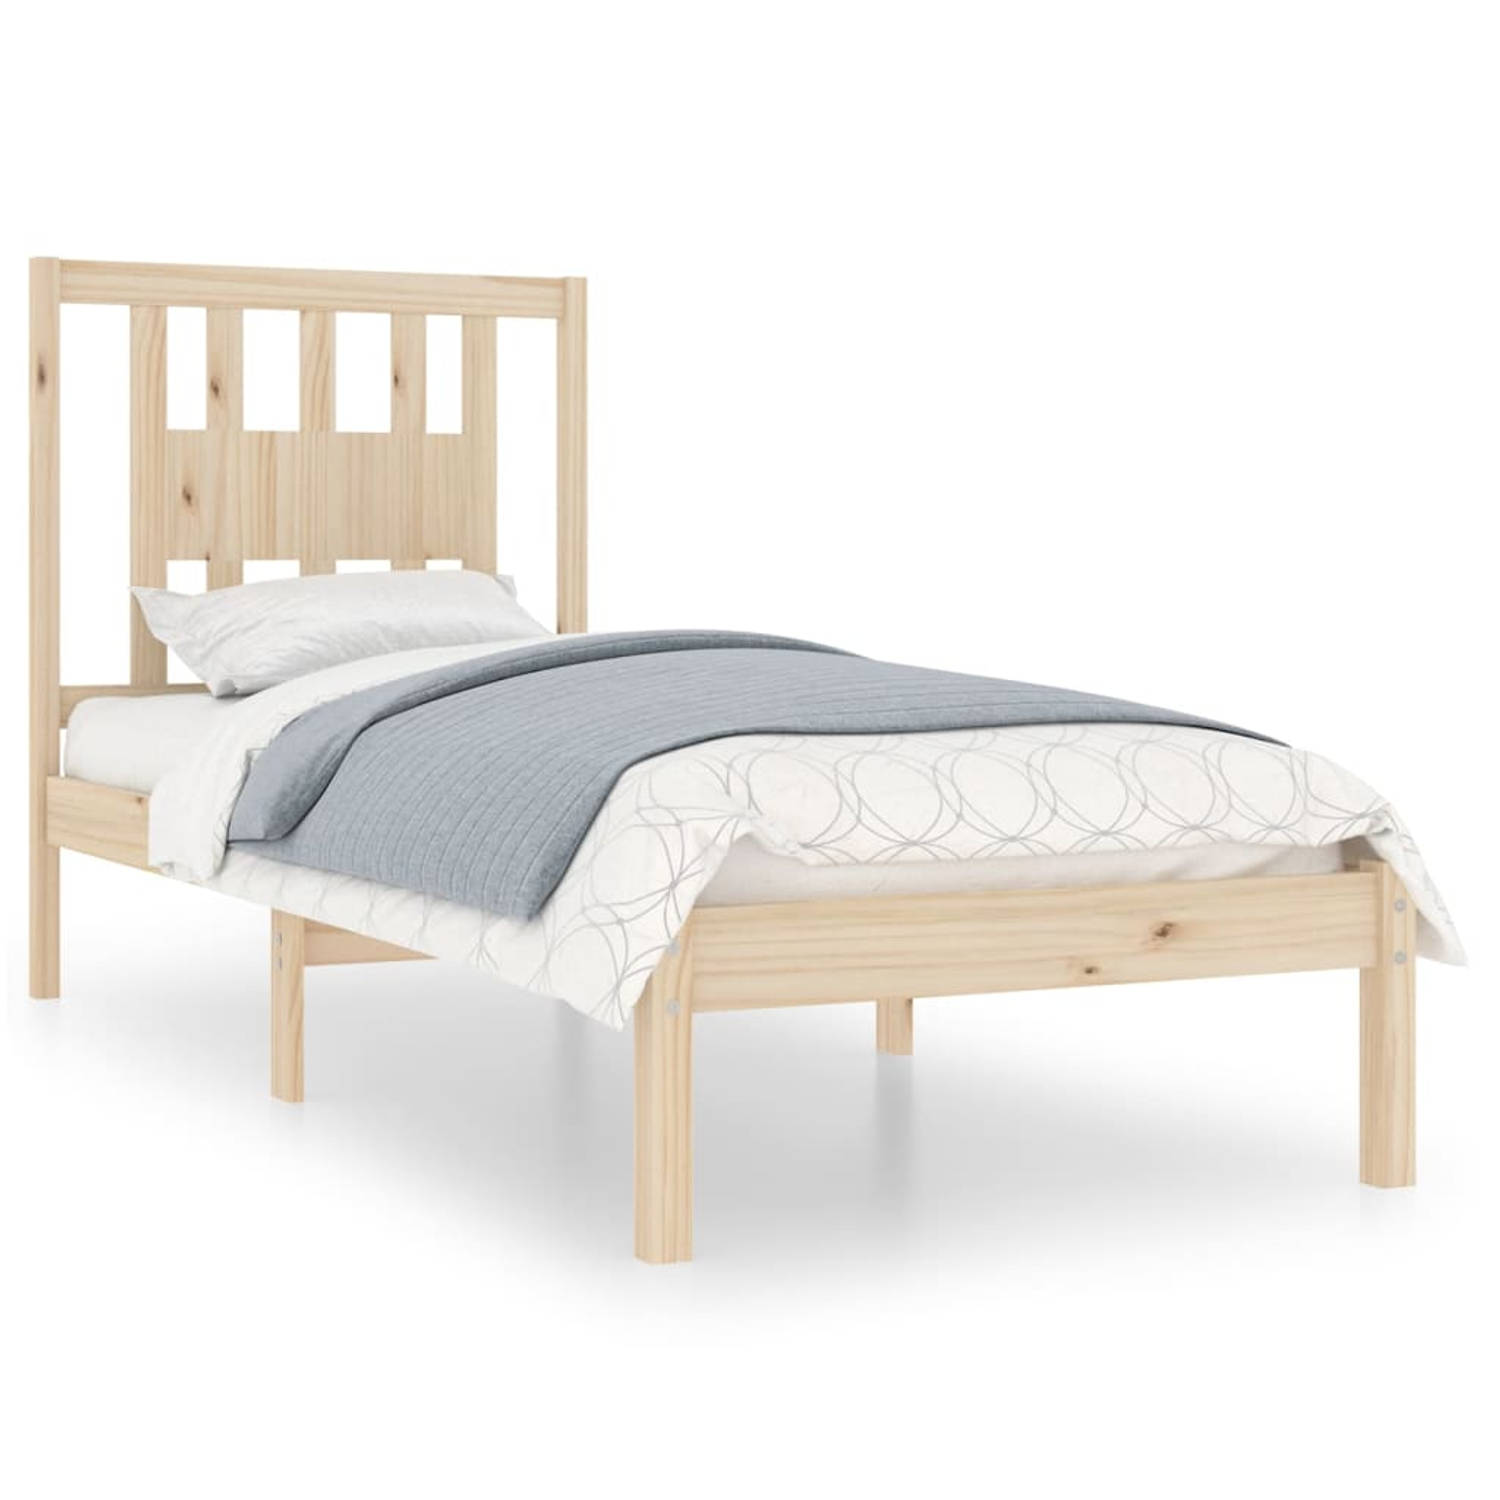 The Living Store Bedframe massief grenenhout 90x200 cm - Bedframe - Bedframes - Eenpersoonsbed - Bed - Bedombouw - Ledikant - Houten Bedframe - Eenpersoonsbedden - Bedden - Bedombo